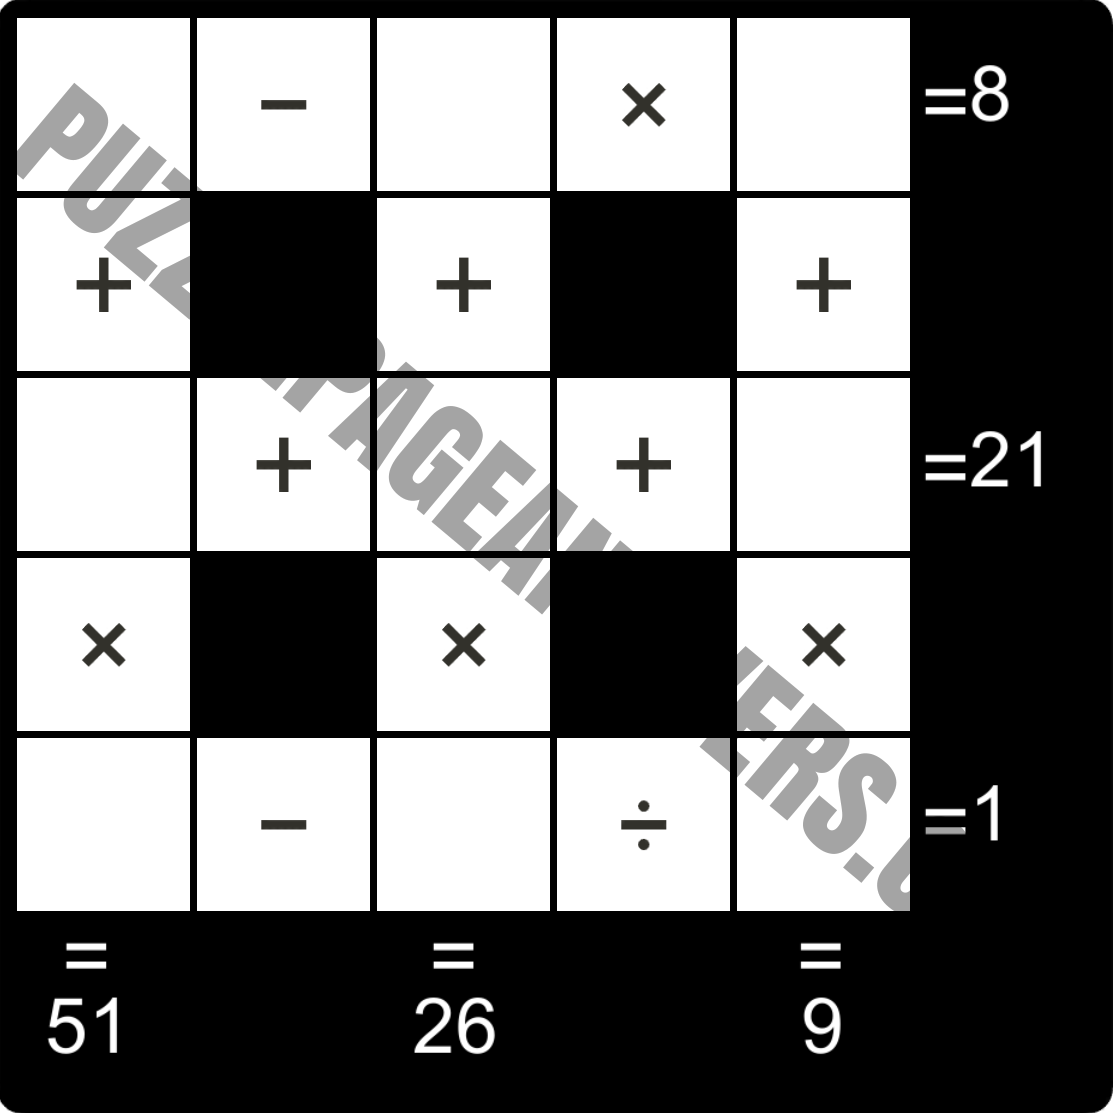 Puzzle Page Cross Sum September 30 2019 PuzzlePageAnswers com